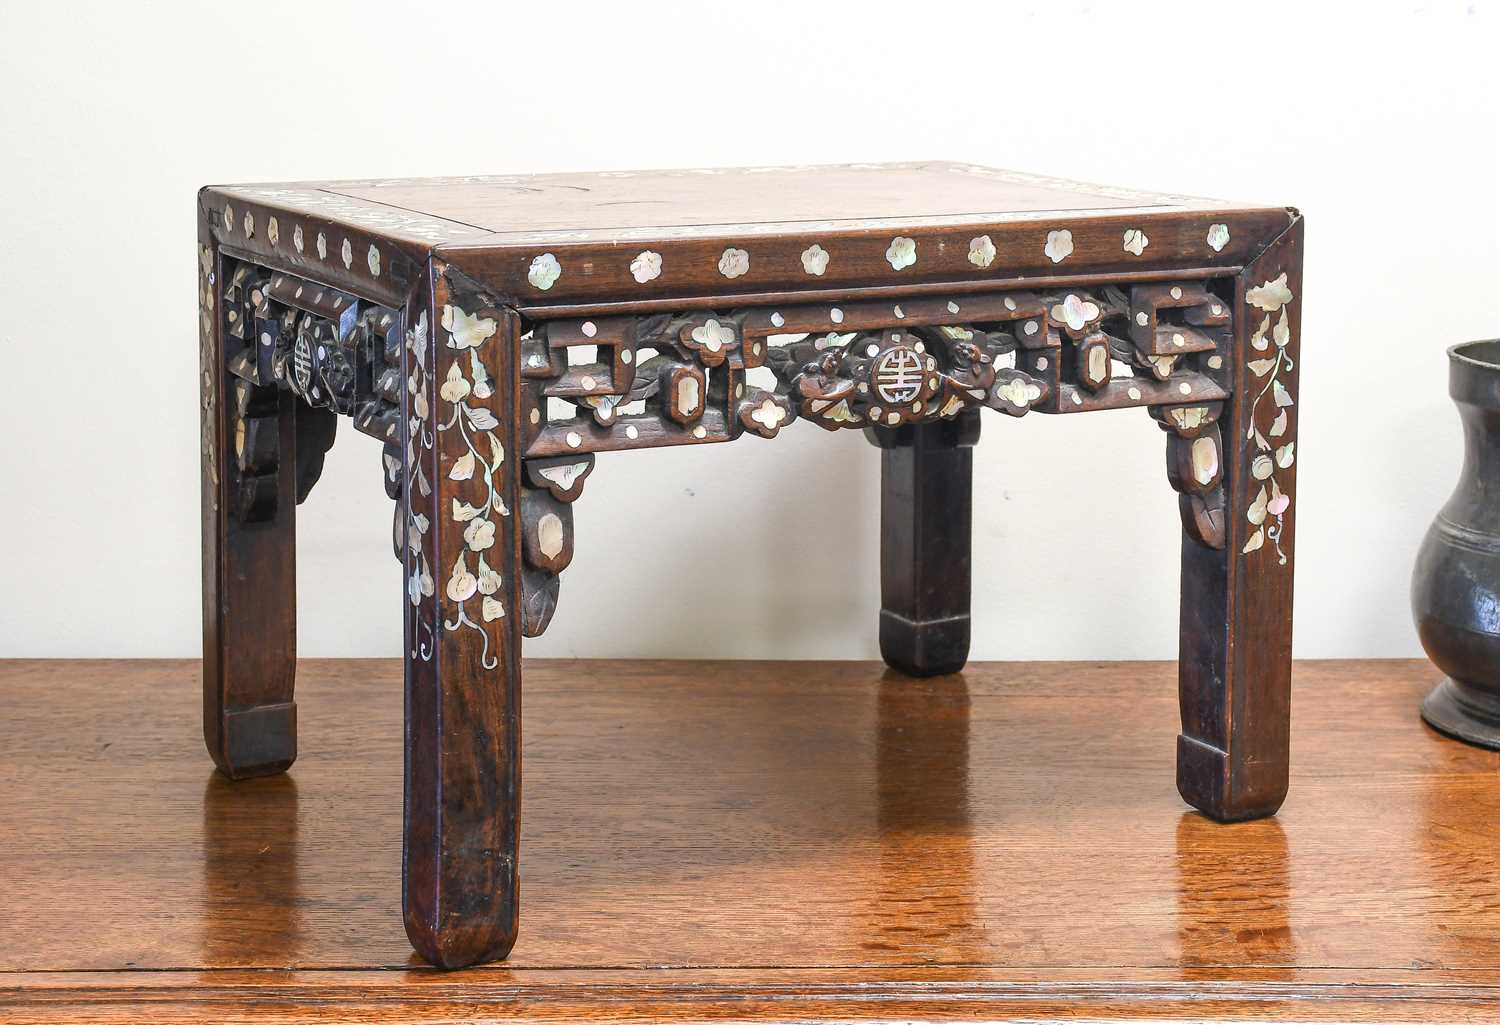 A Chinese Mother-of-Pearl-Inlaid Hardwood Low Table, 19th century, the panelled rectagular top